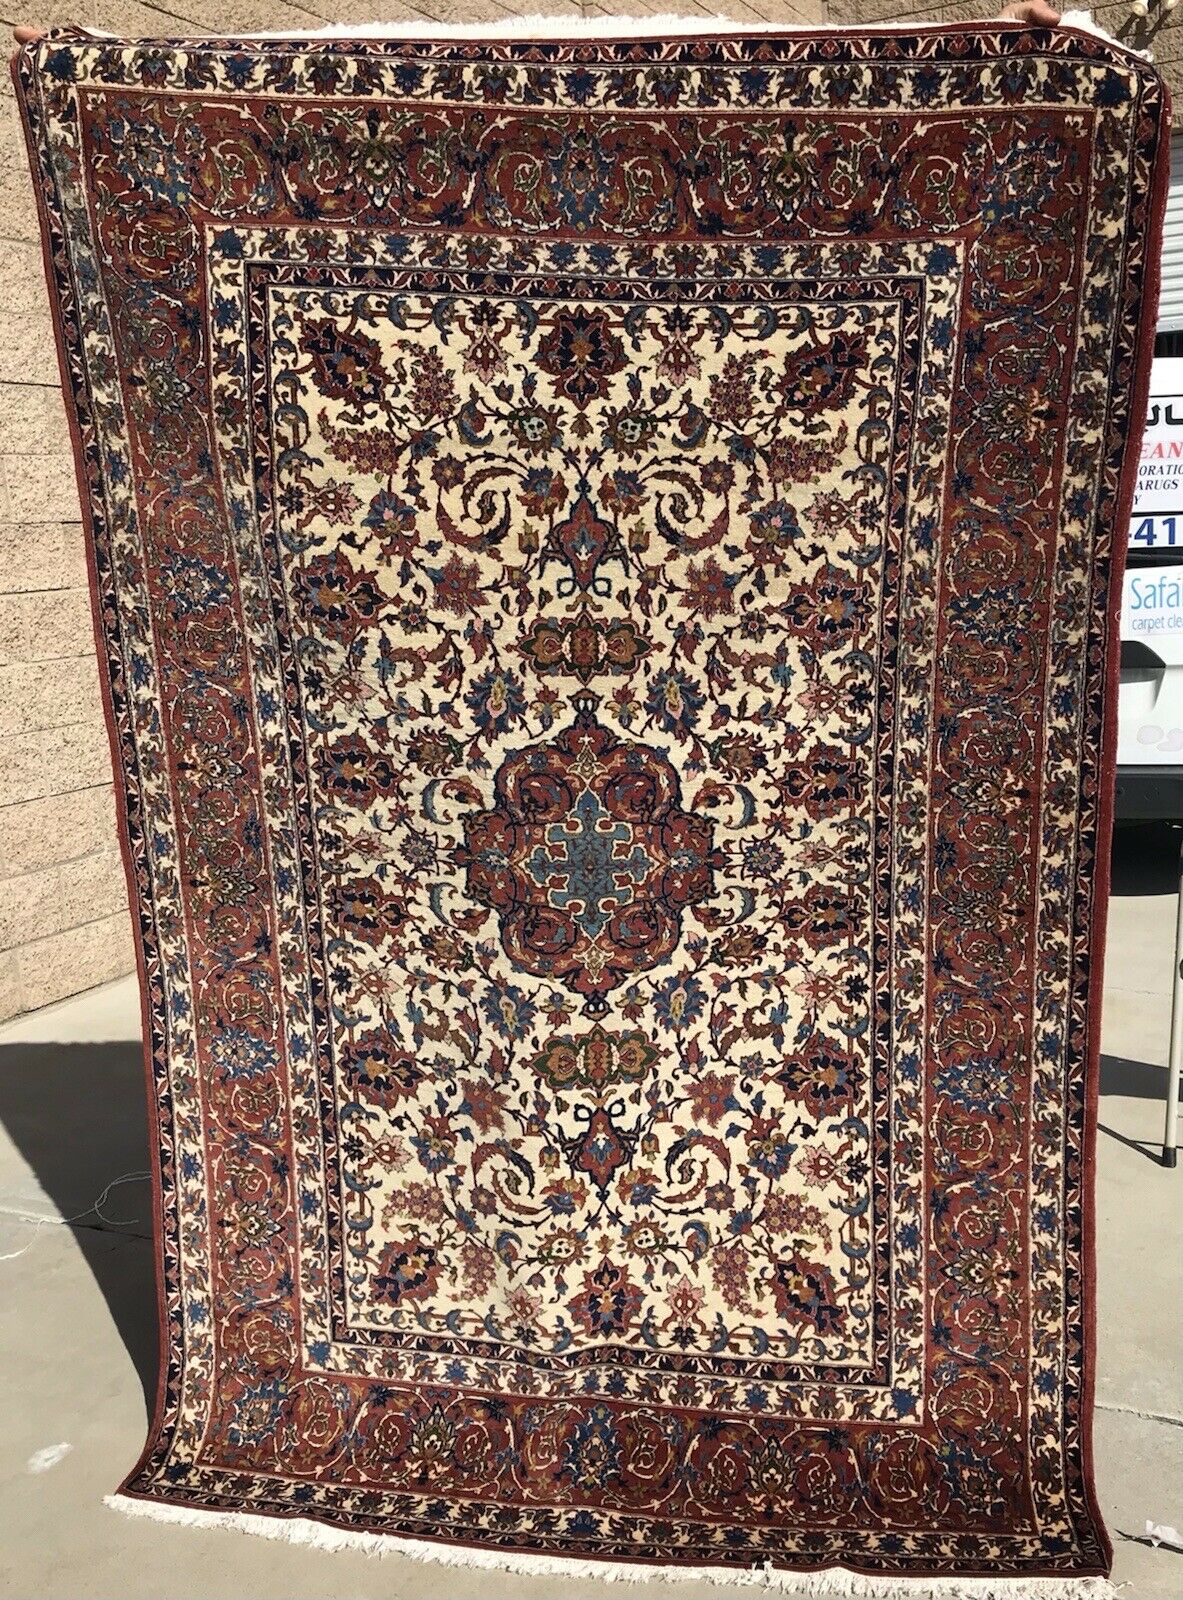 AN AUTHENTIC FINE CLASSIC ISPHONI RUG 4’7” X 7’1”